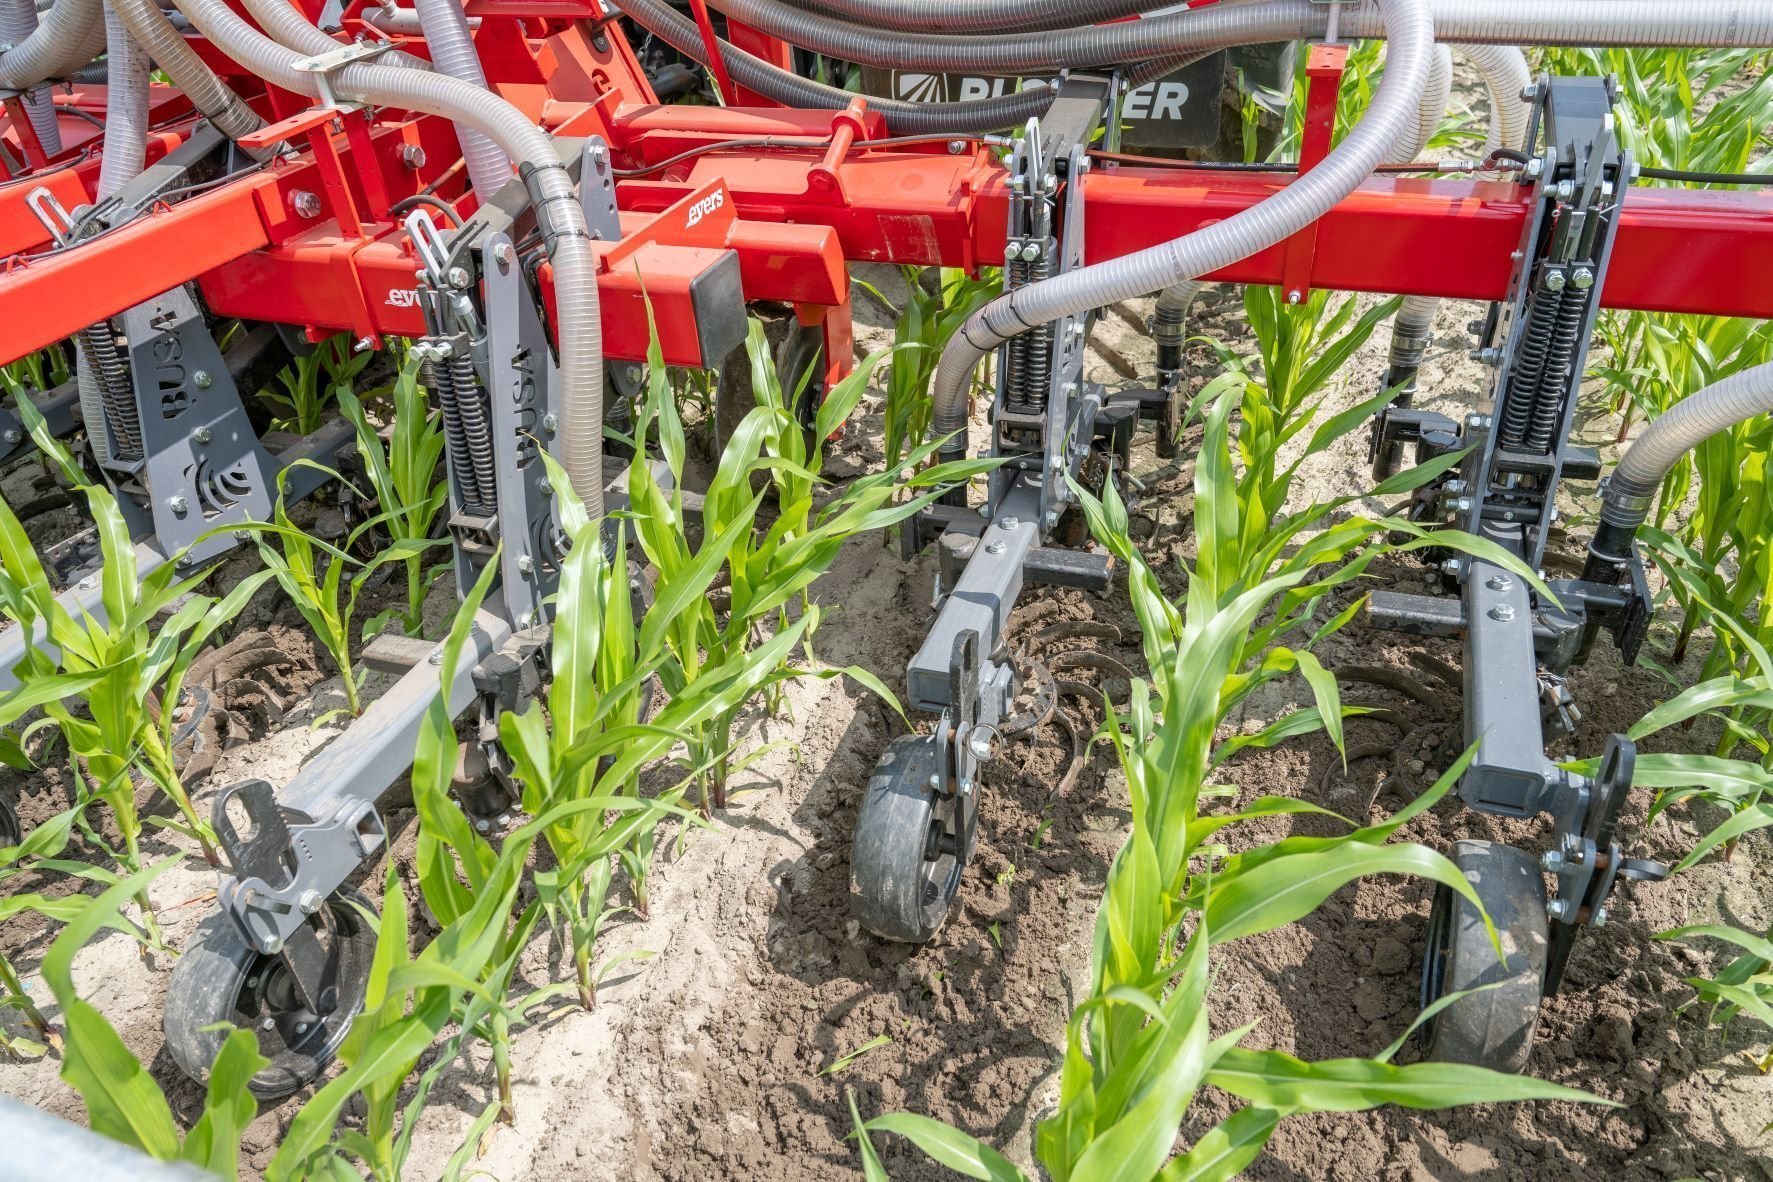 Evers Inter-row crop injector: slurry injection and hoeing of maize land in one pass